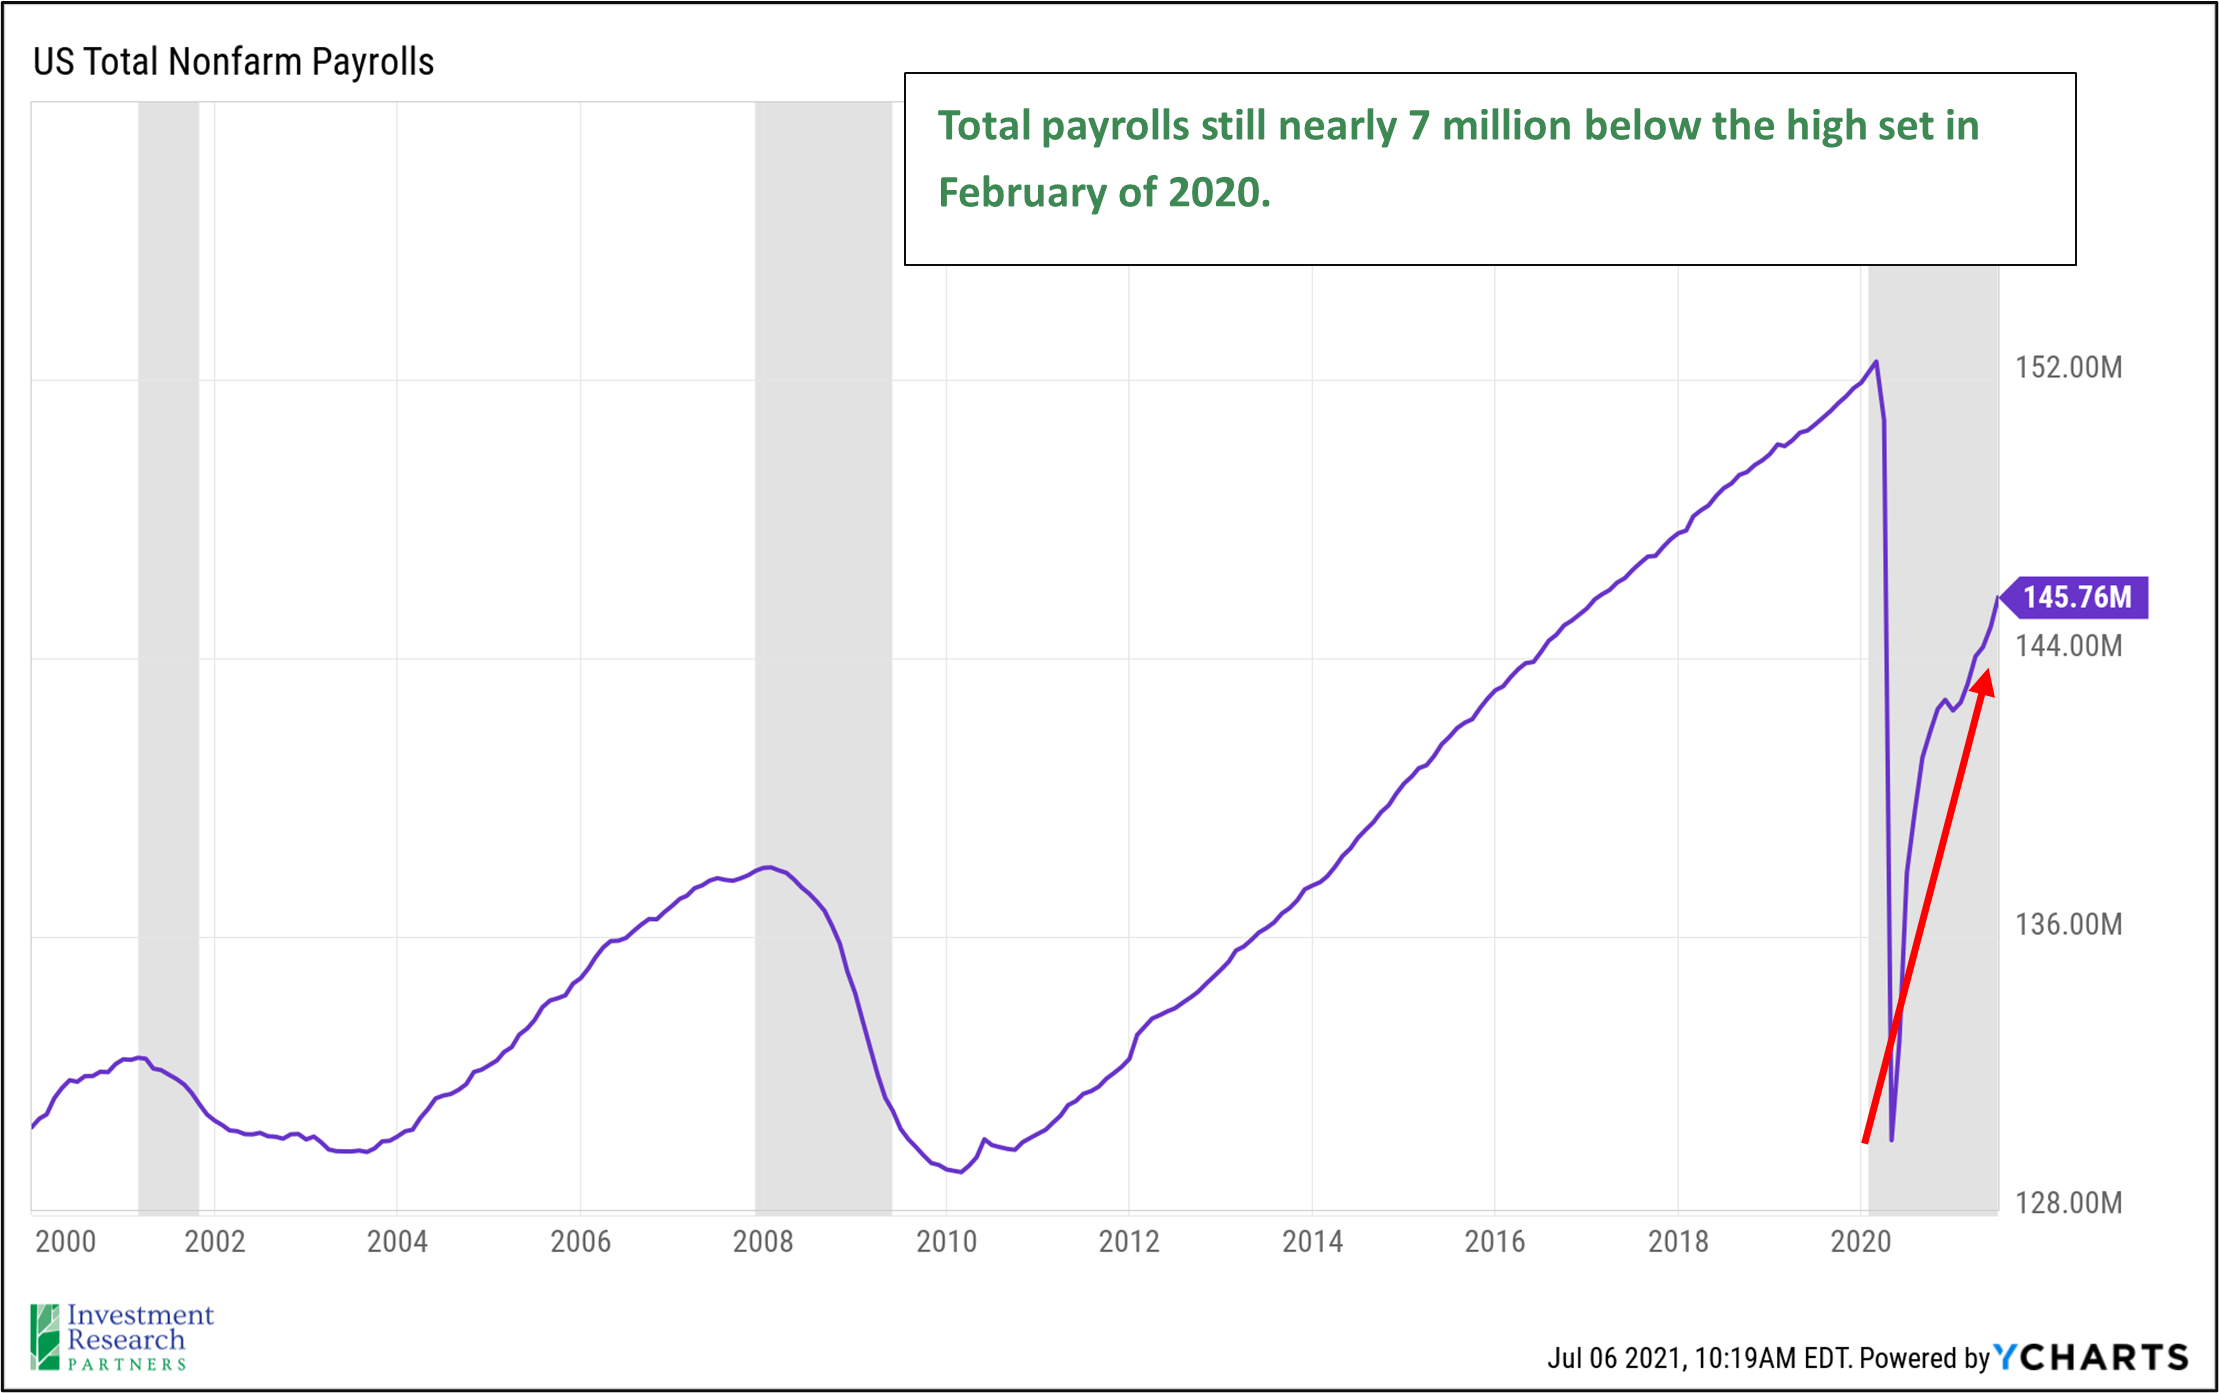 Line graph depicting US Total Nonfarm Payrolls from 2000 to 2021 with note: Total payrolls still nearly 7 million below the high set in February of 2020.